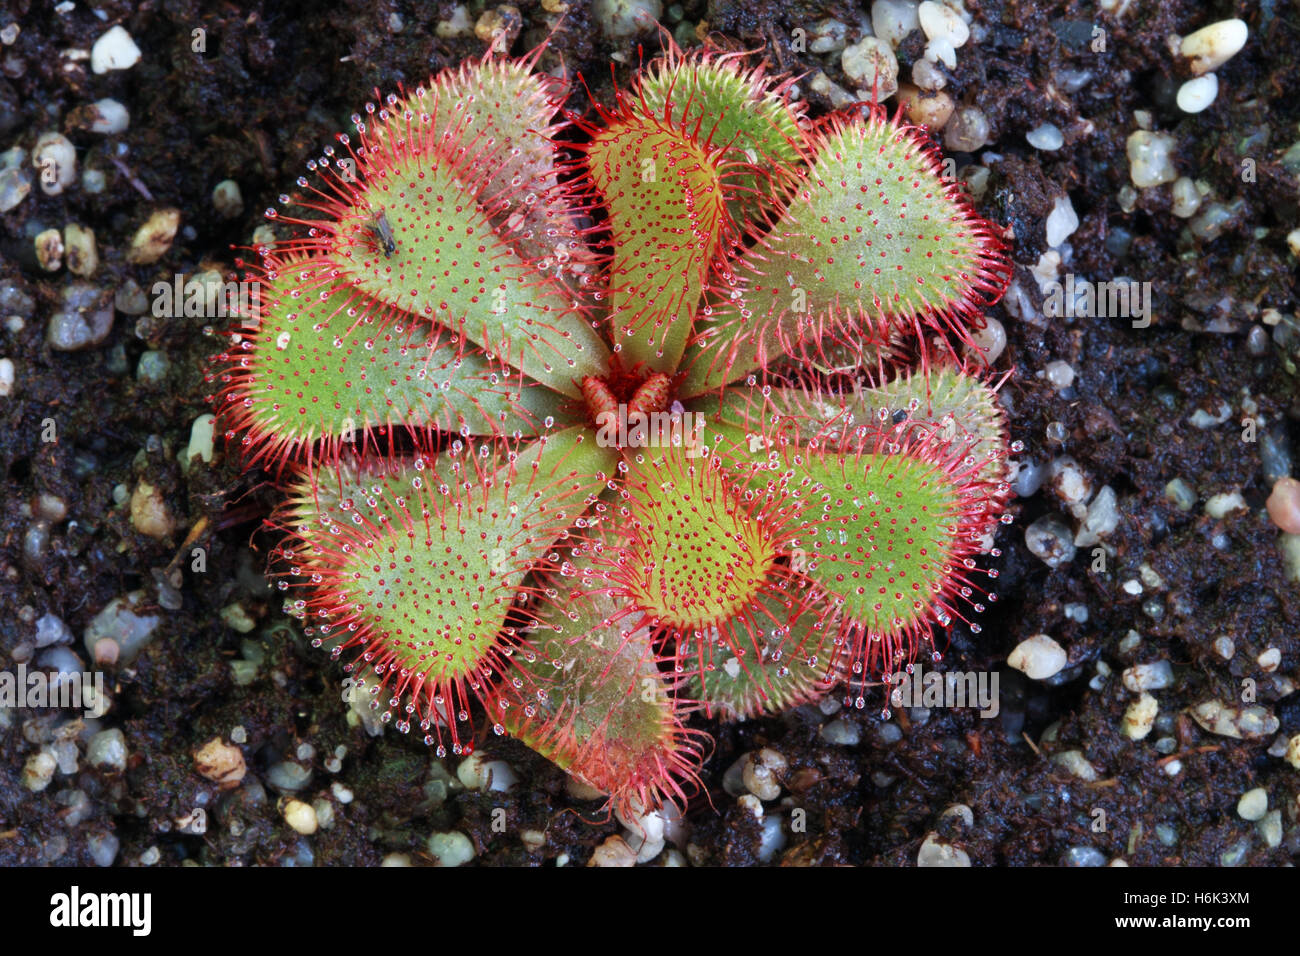 Drosera slackii is a subtropical sundew native to the Cape Provinces of South Africa. Stock Photo